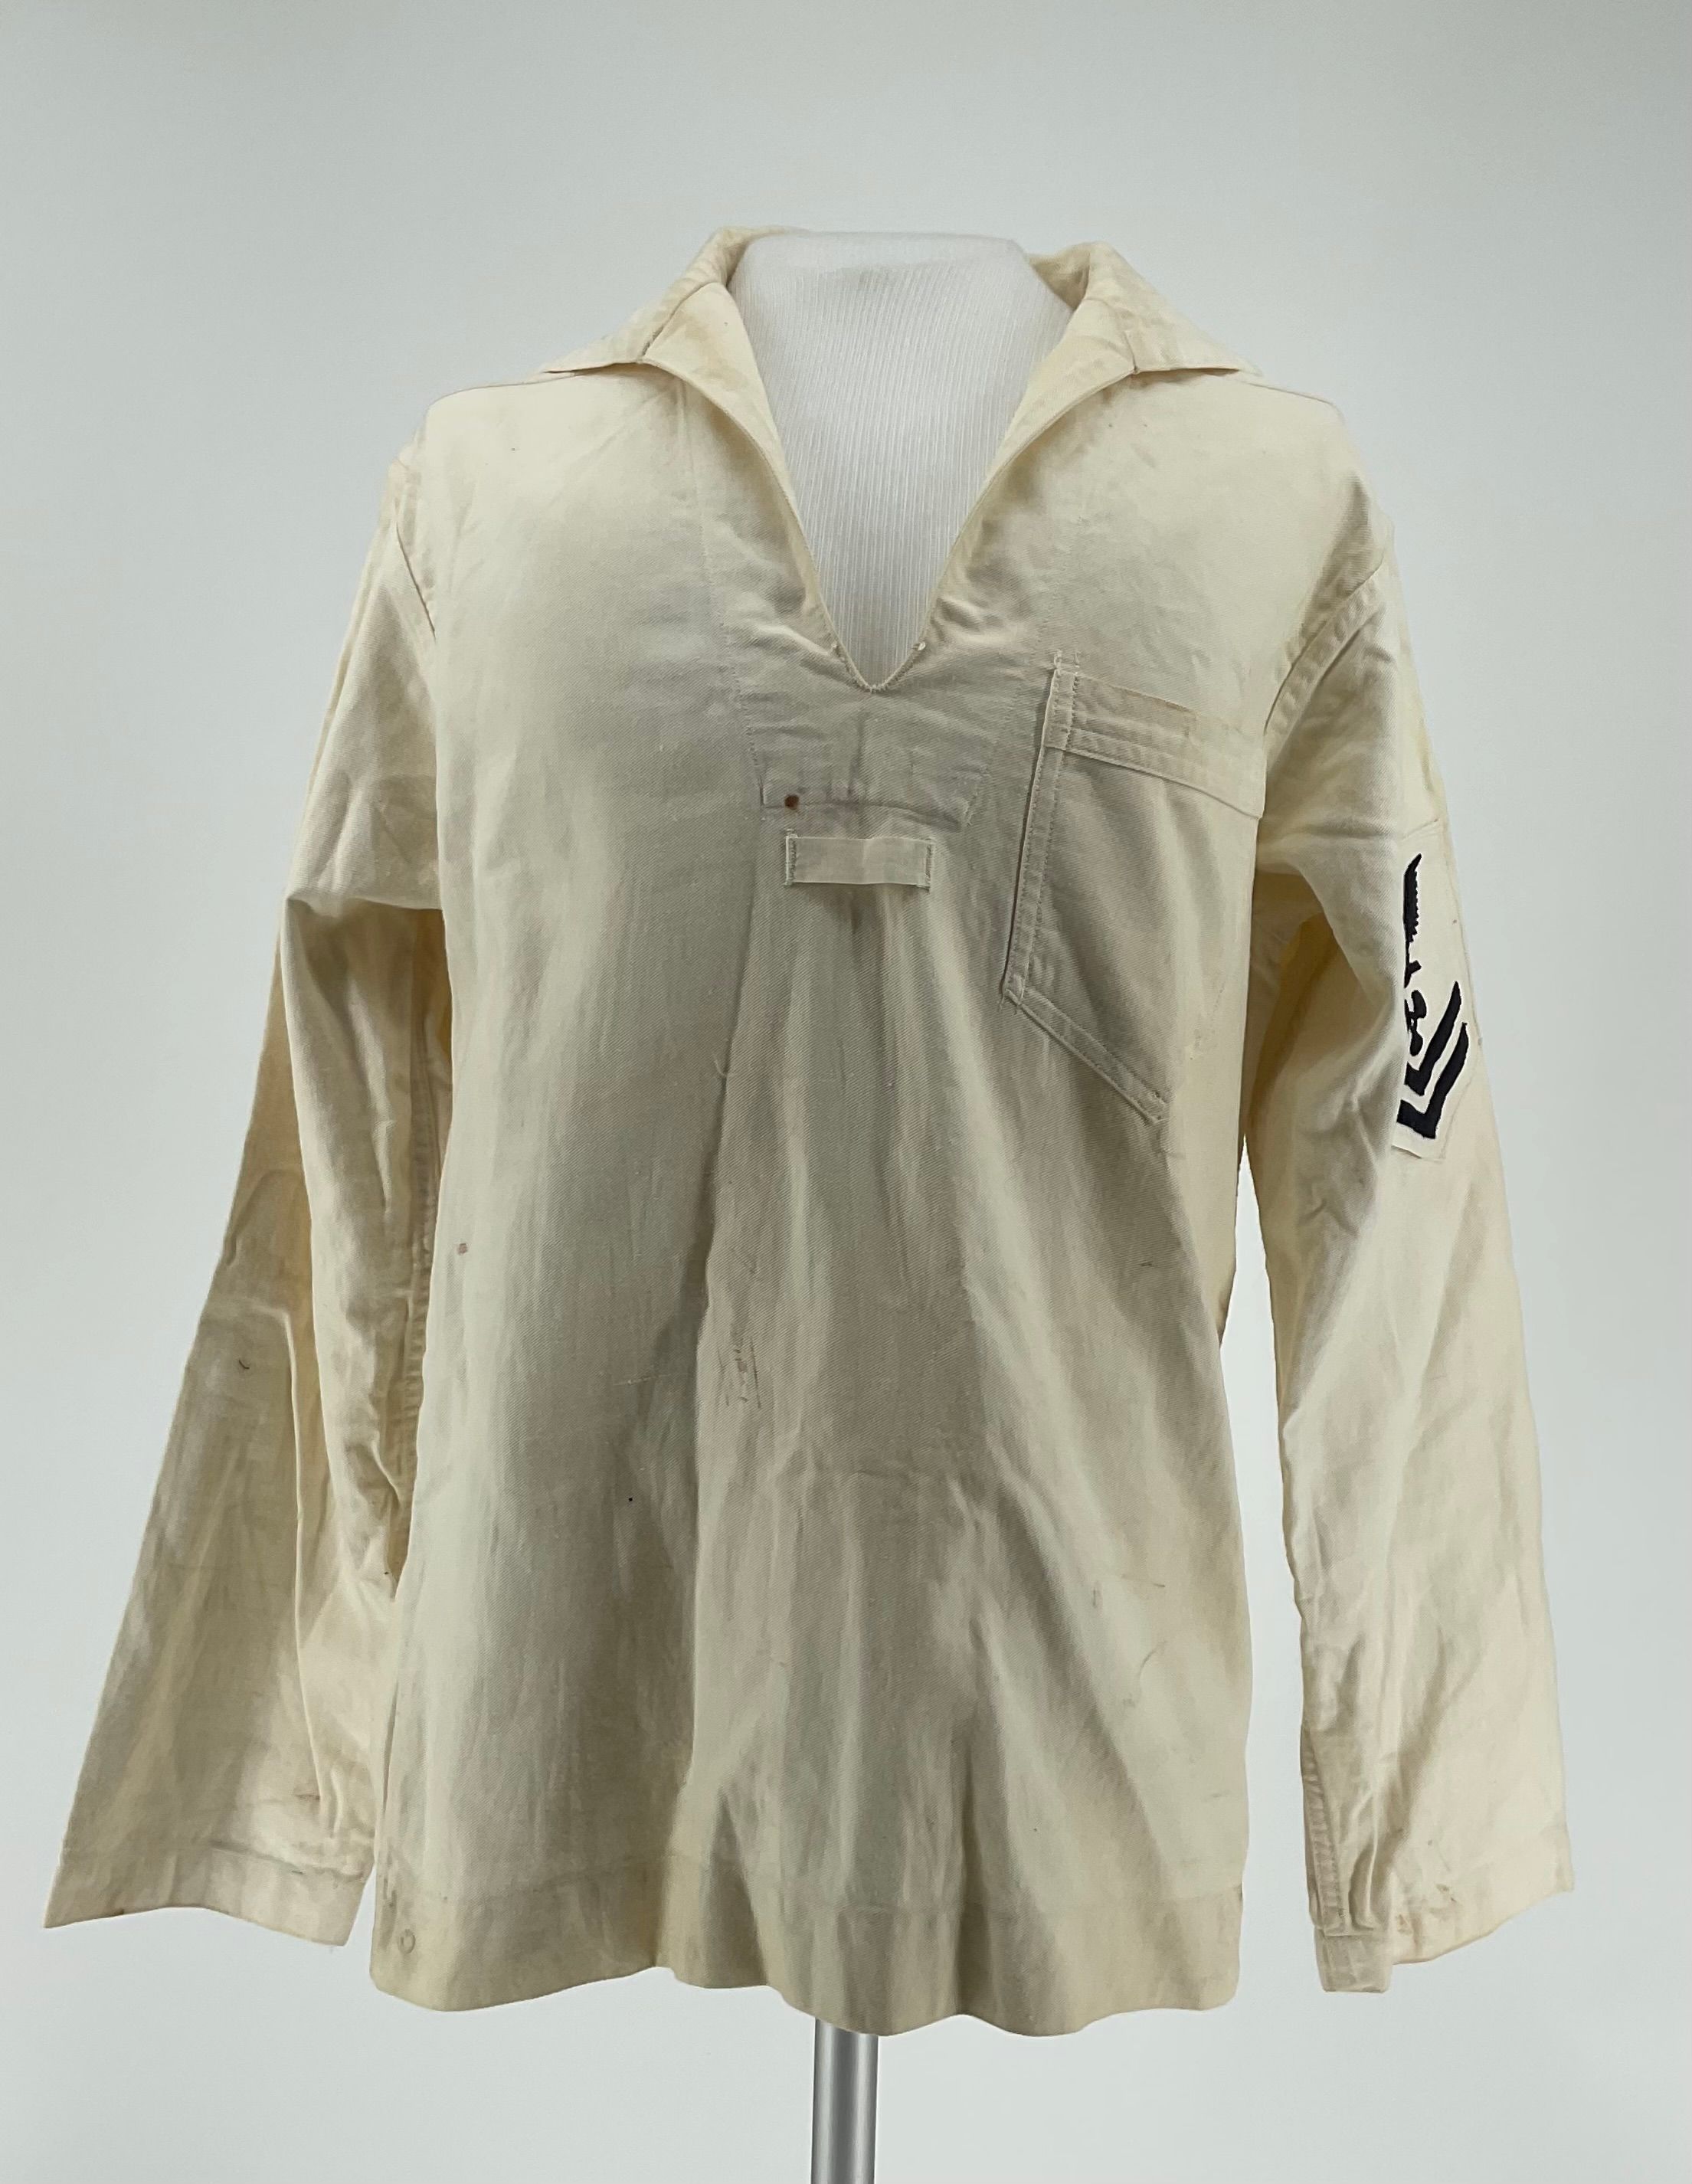 Primary Image of US Navy Dress White Service Jumper